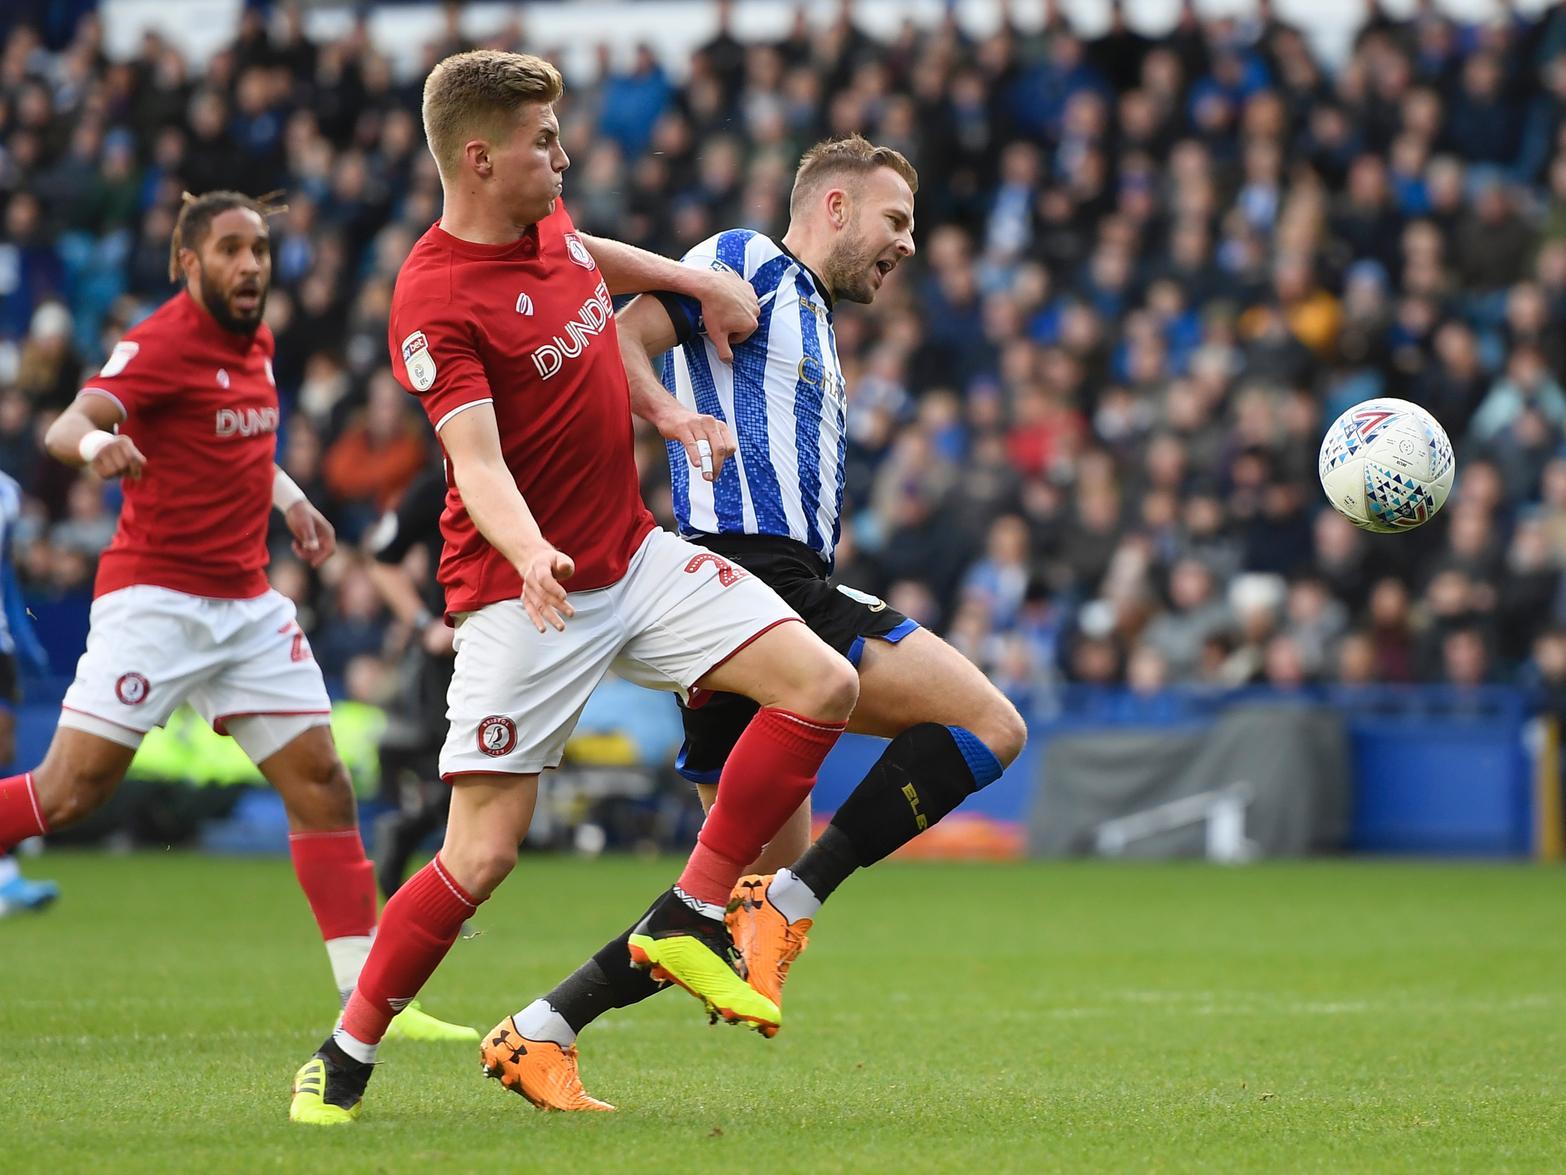 A hat-trick at Nottingham Forest aside, Rhodes is probably due a departure from Sheffield Wednesday, if nothing else, to free him from the wage bill and give the Owls an opportunity to bring someone else in. Wigan Athletic and former club Blackburn Rovers have been linked.